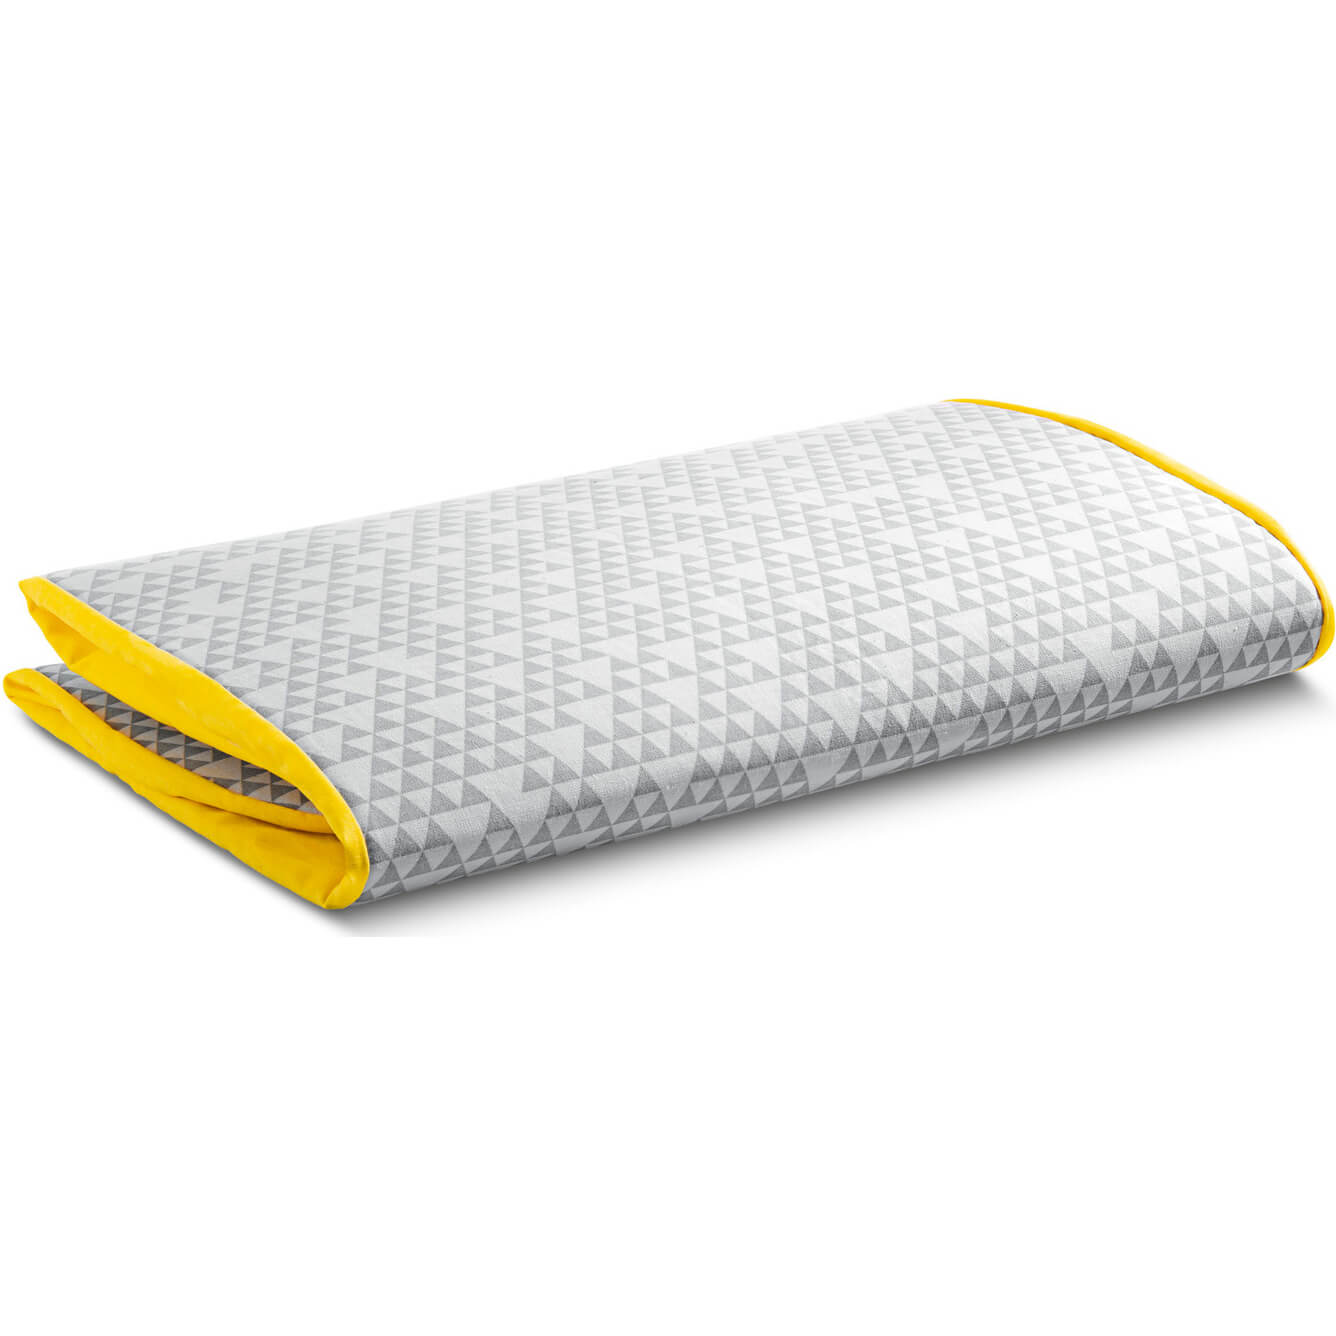 Karcher Cover for AB 1000 Ironing Board